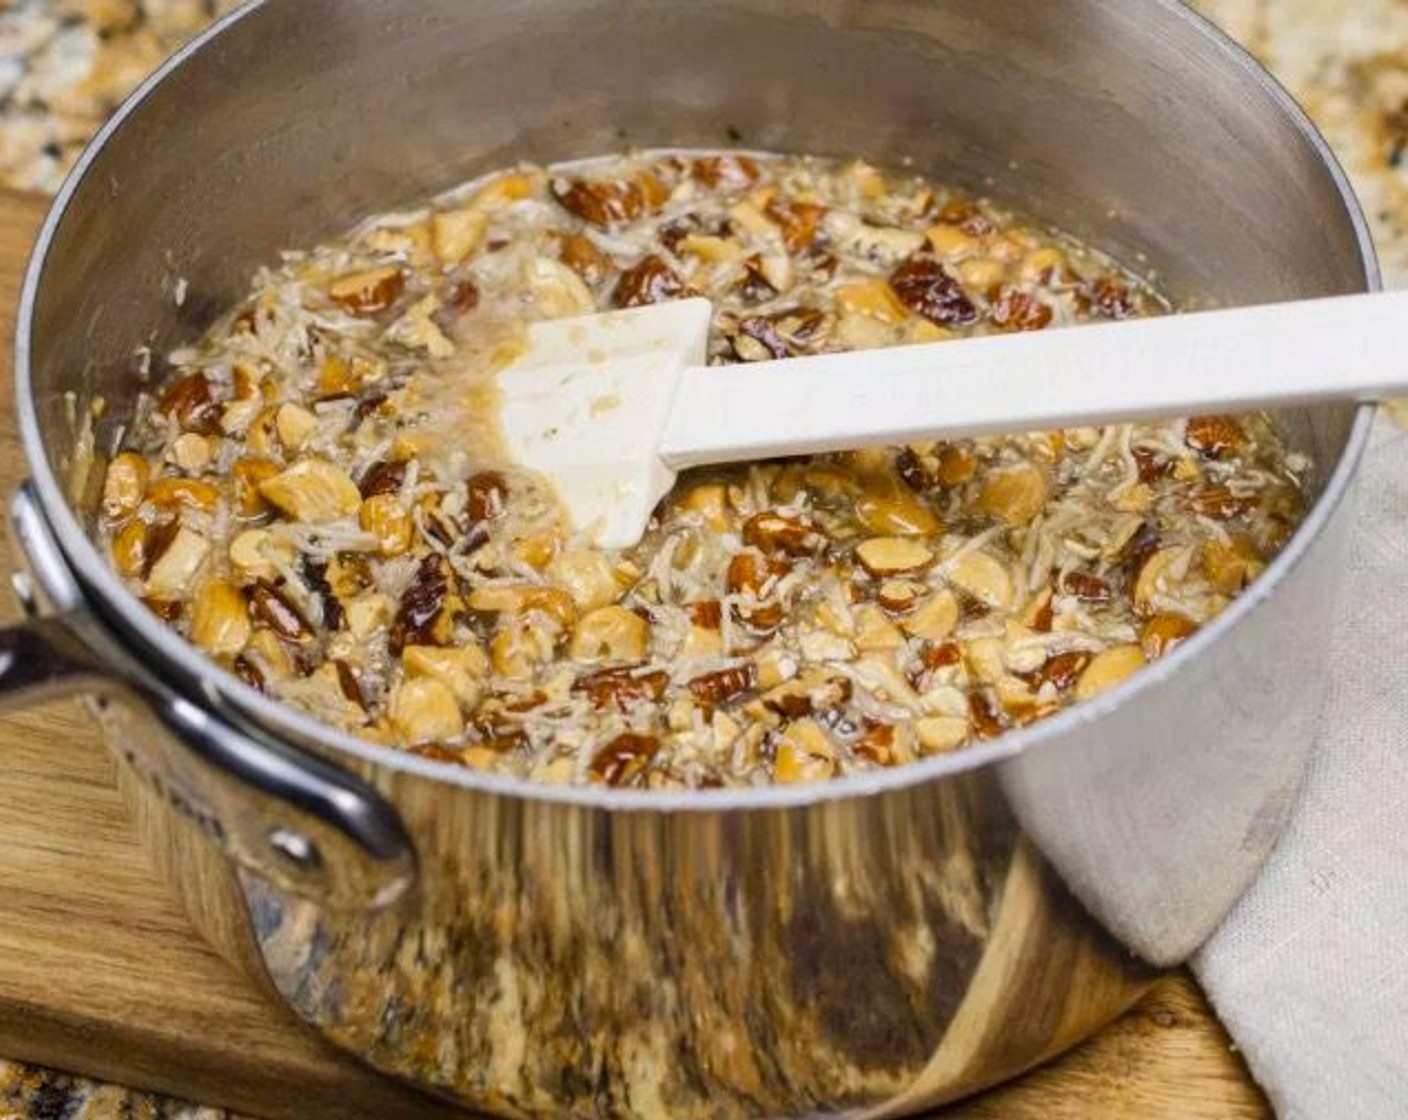 step 10 Remove from heat and add Pure Vanilla Extract (1 tsp), Roasted Nuts, and Unsweetened Coconut Flakes (1 1/2 cups). Allow to cool and thicken slightly, about 30 minutes.